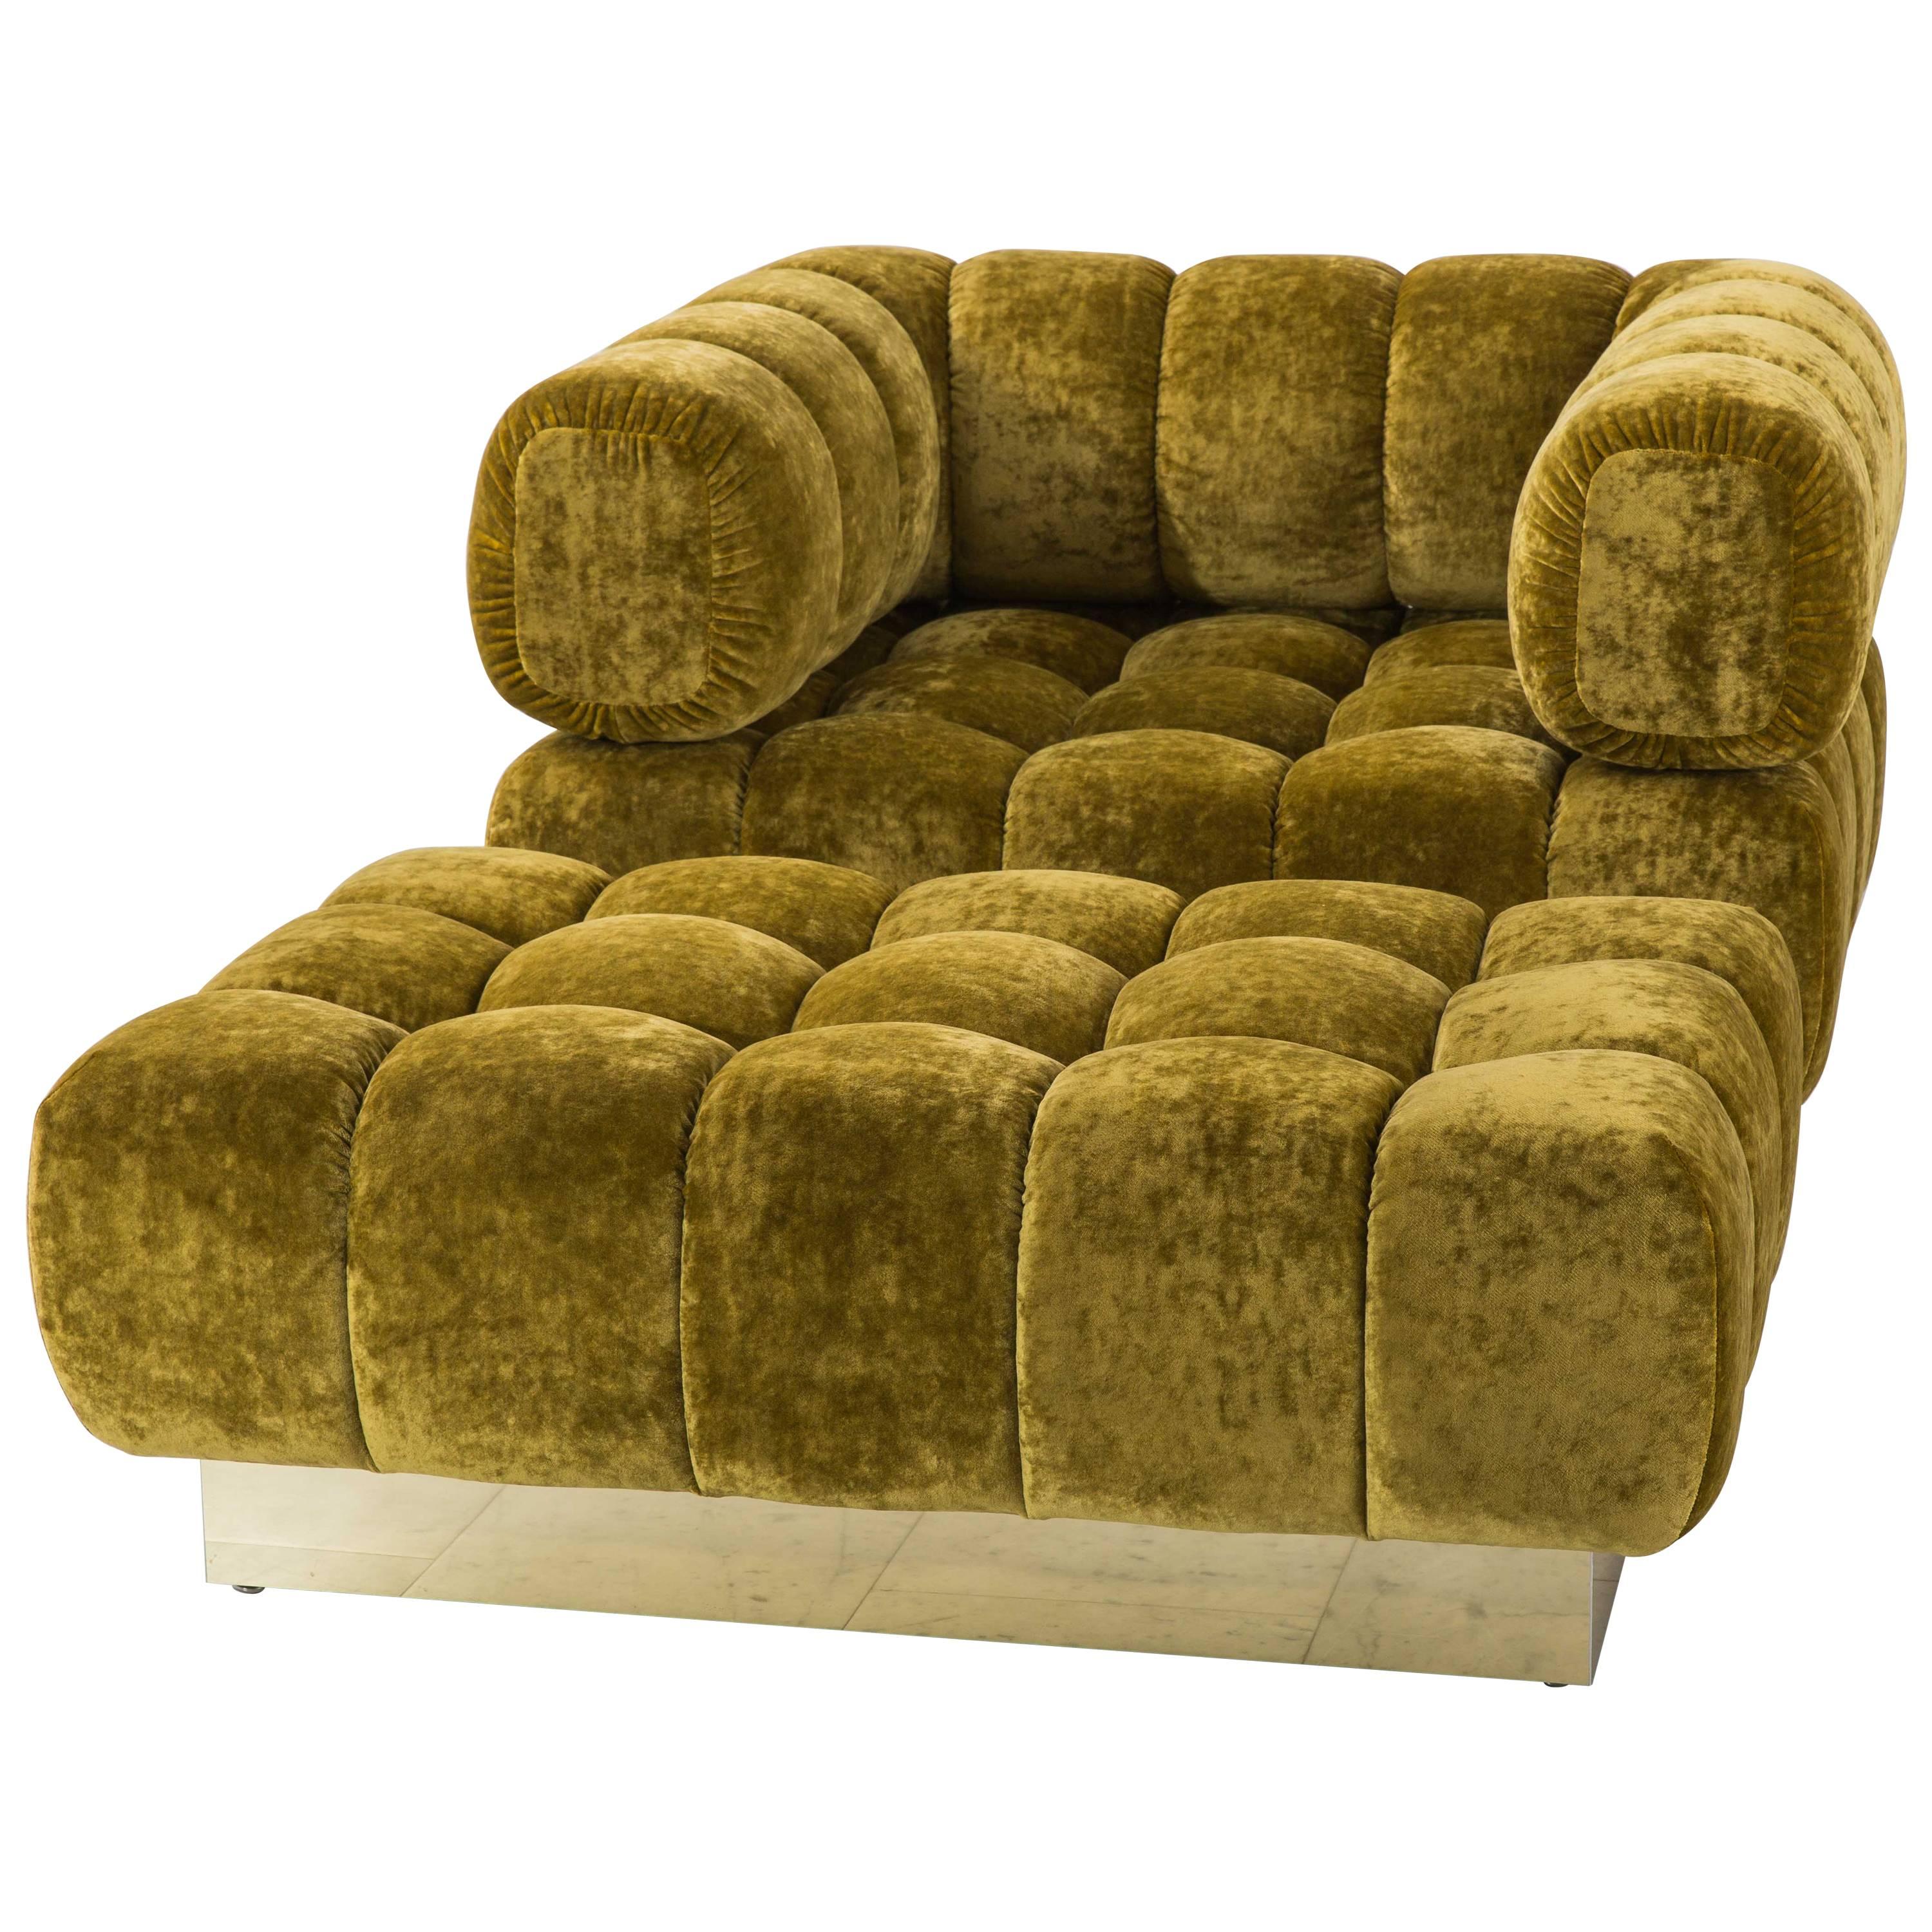 Todd Merrill custom originals pair of channel tufted club chairs – Todd Merrill

Description
A single chair and ottoman from the Todd Merrill Custom Originals line upholstered in Romo velvet with a brass base.

This elegant, comfortable and